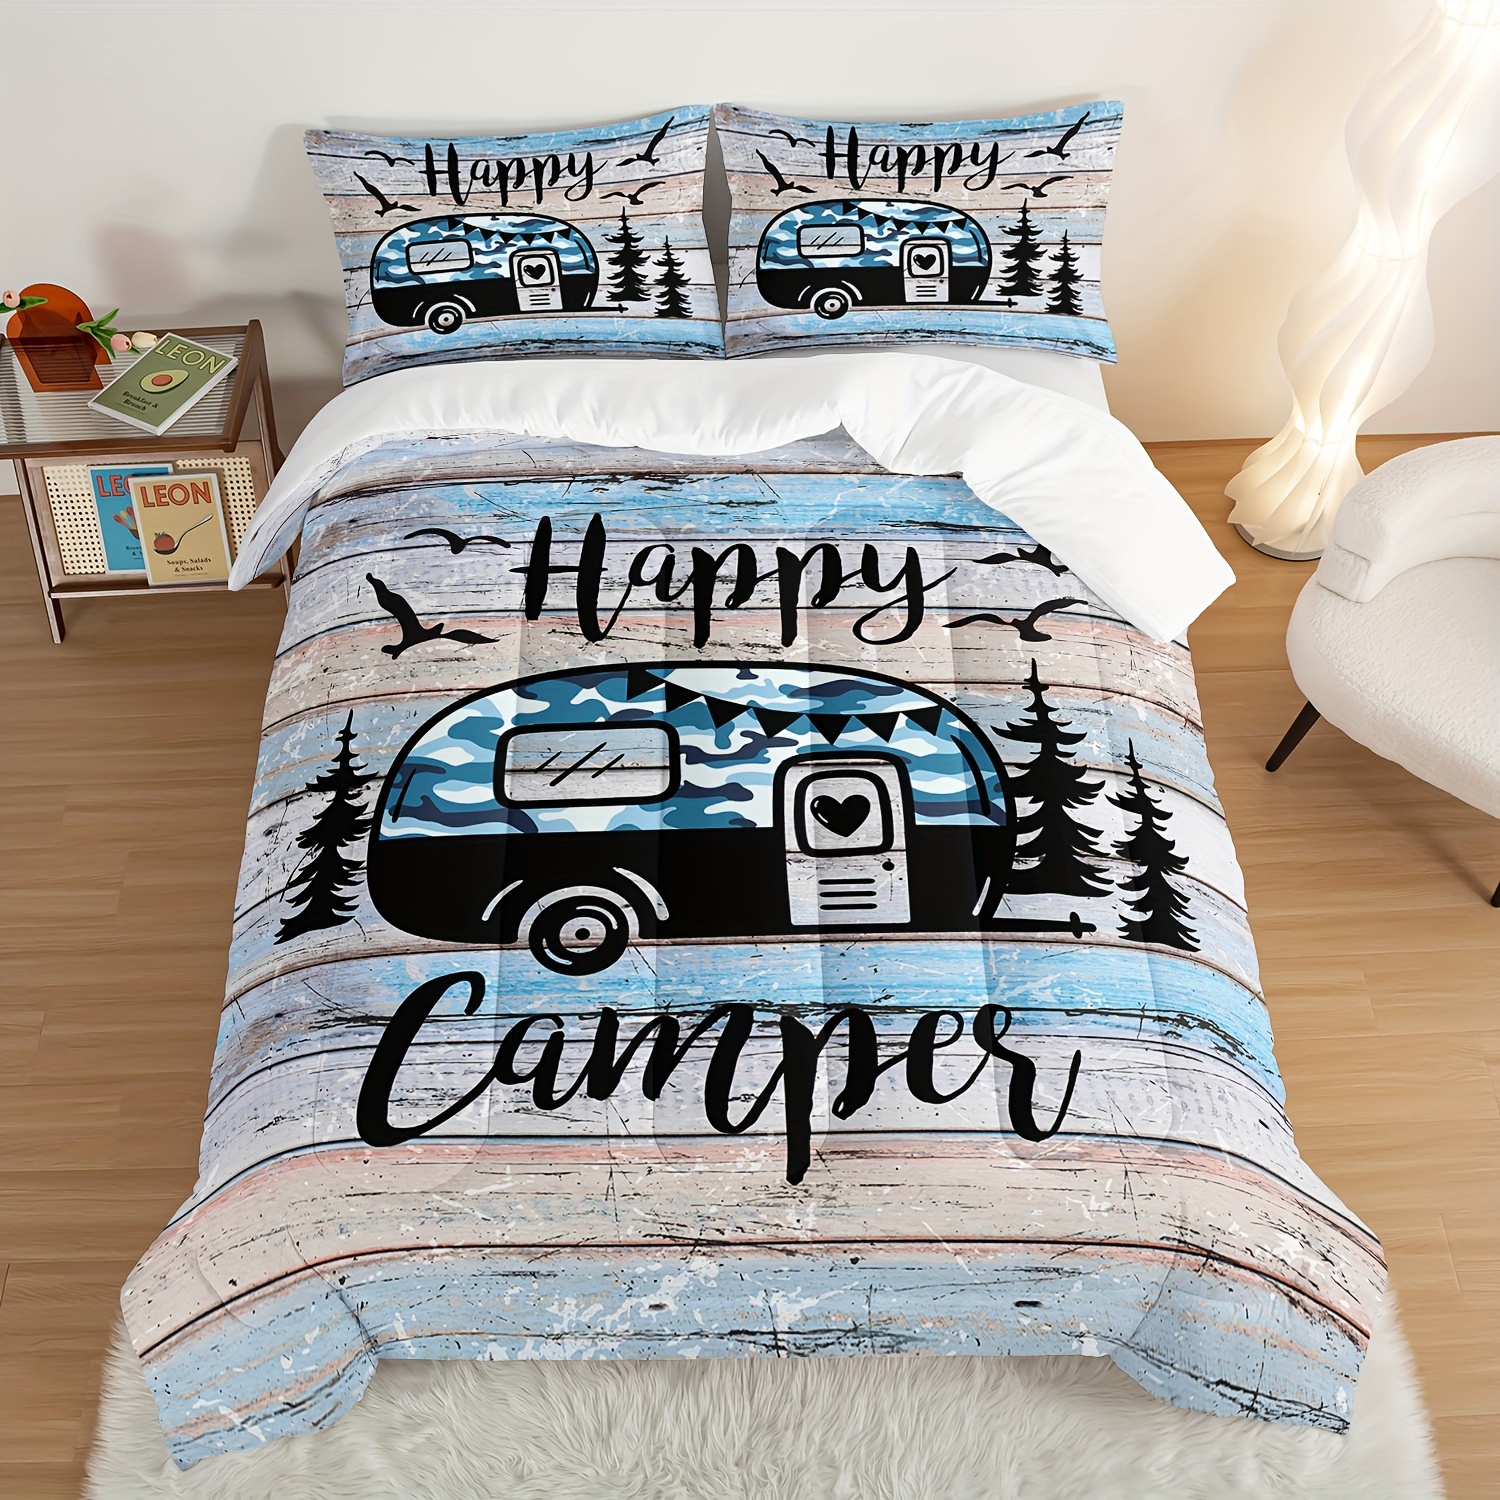 

3pcs Modern Fashion Polyester Comforter Set (1*comforter + 2*pillowcase, Without Core), Camping Camouflage Car Print Bedding Set, Soft Comfortable And Skin-friendly Comforter For Bedroom, Guest Room